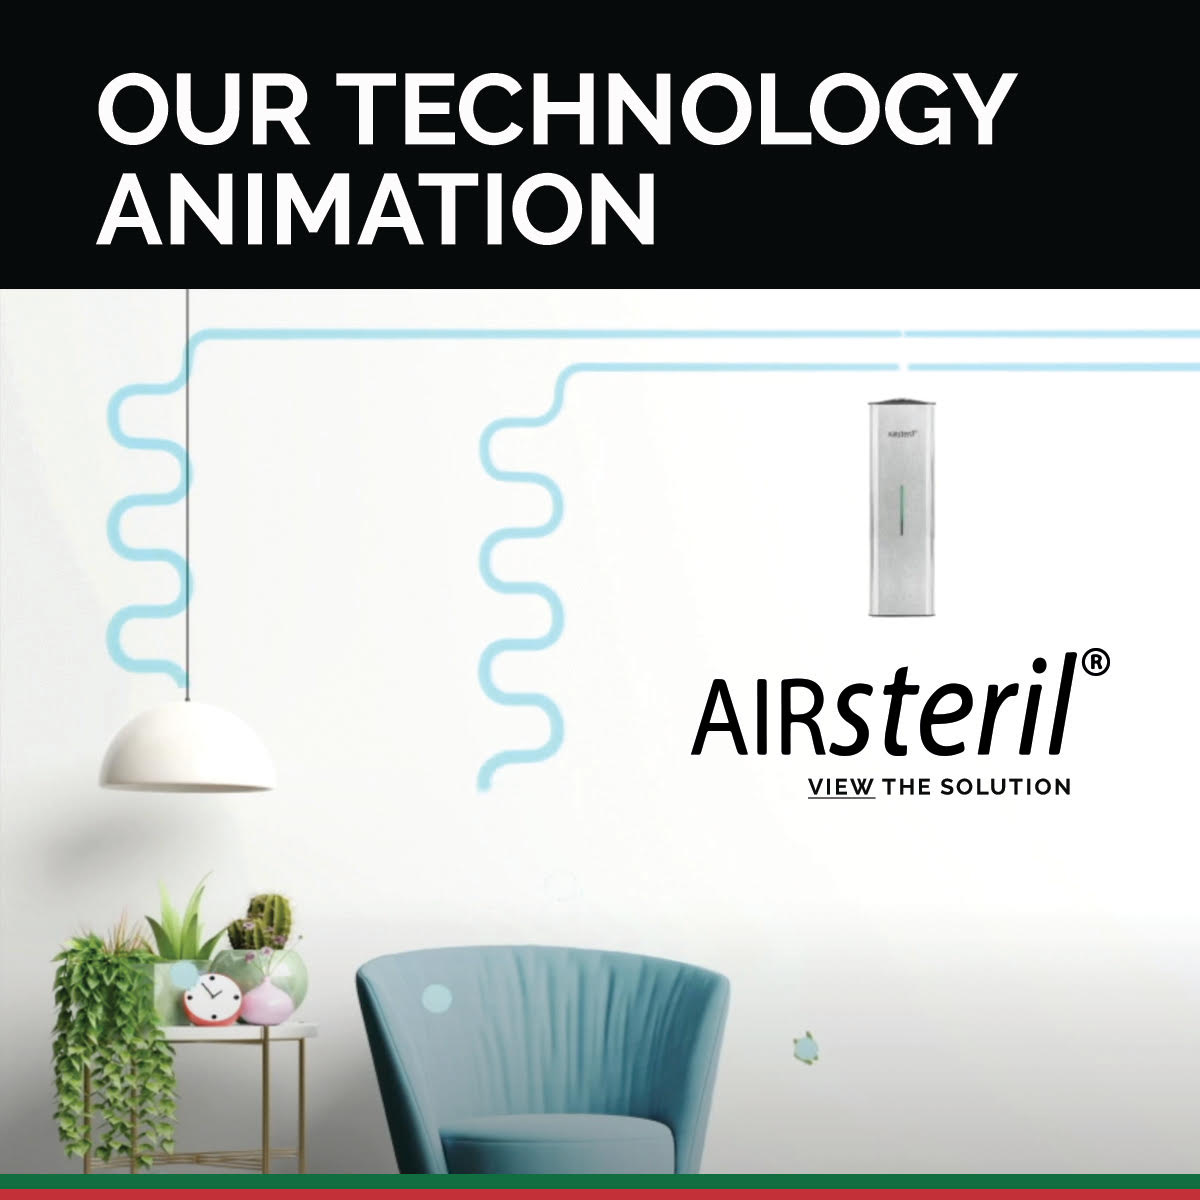 We have had multiple requests for a clean version of the technology animation from the recent news coverage. View video here: youtube.com/watch?v=NC8AmD…
For more information on AIRsteril please view our website:
airsteril.co.uk
#DAXairscience #scientificallyproventechnology